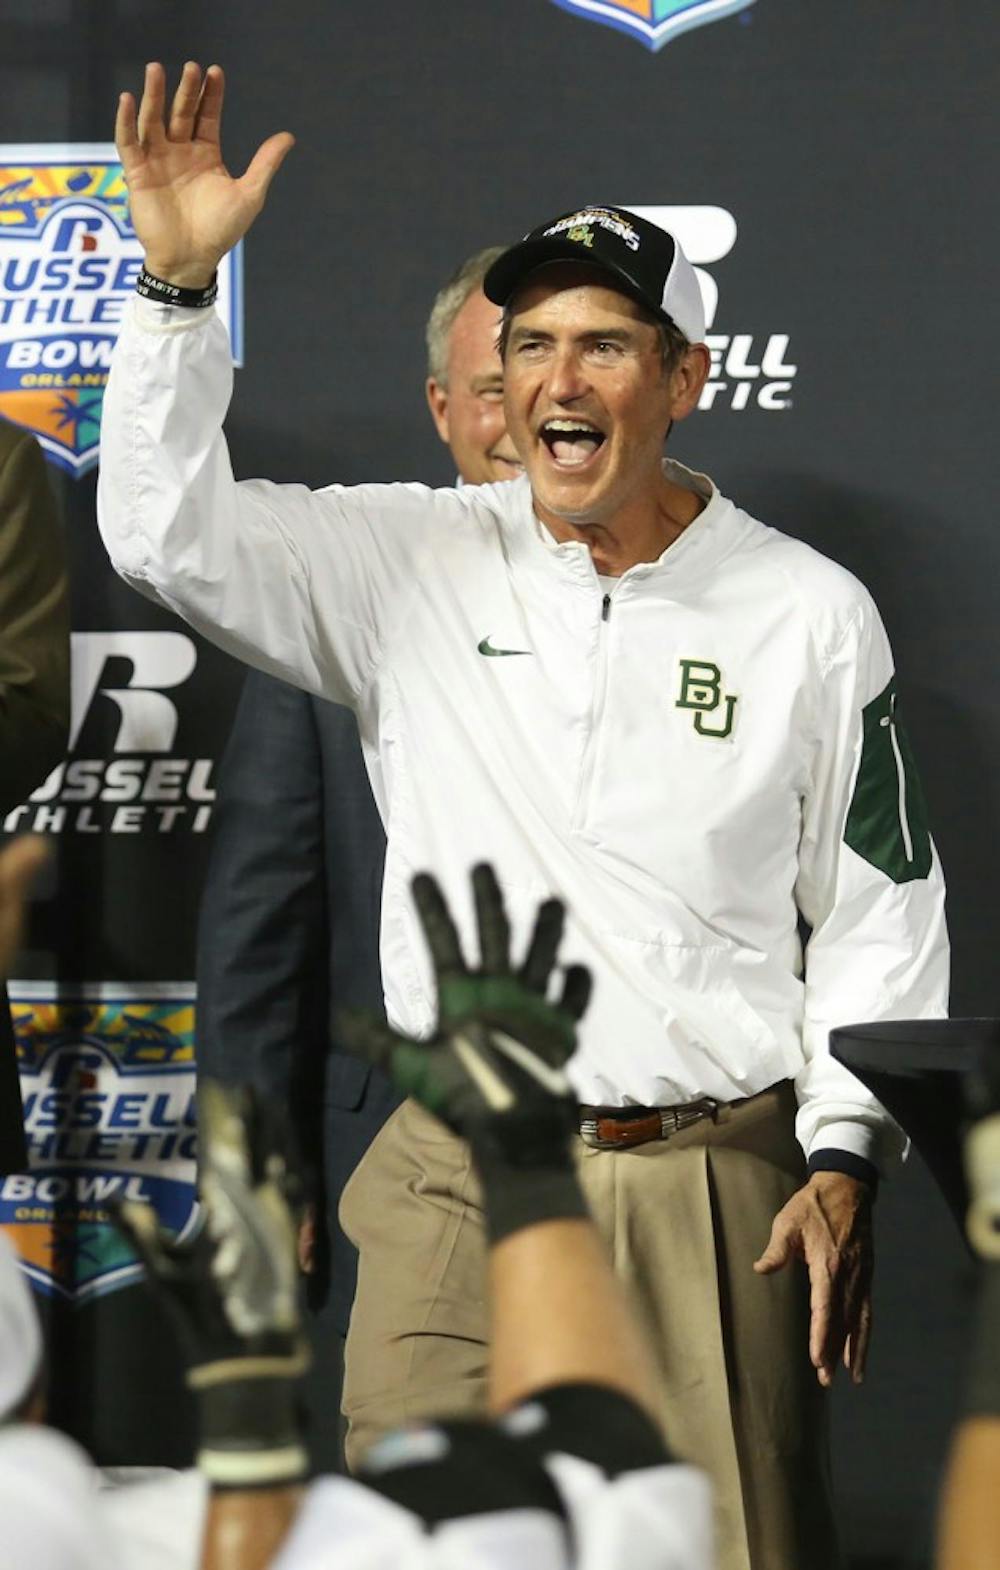 Baylor head coach Art Briles celebrates after winning the Russell Athletic Bowl on Tuesday, Dec. 29, 2015, at the Orlando Citrus Bowl in Orlando, Fla. (Stephen M. Dowell/Orlando Sentinel/TNS)